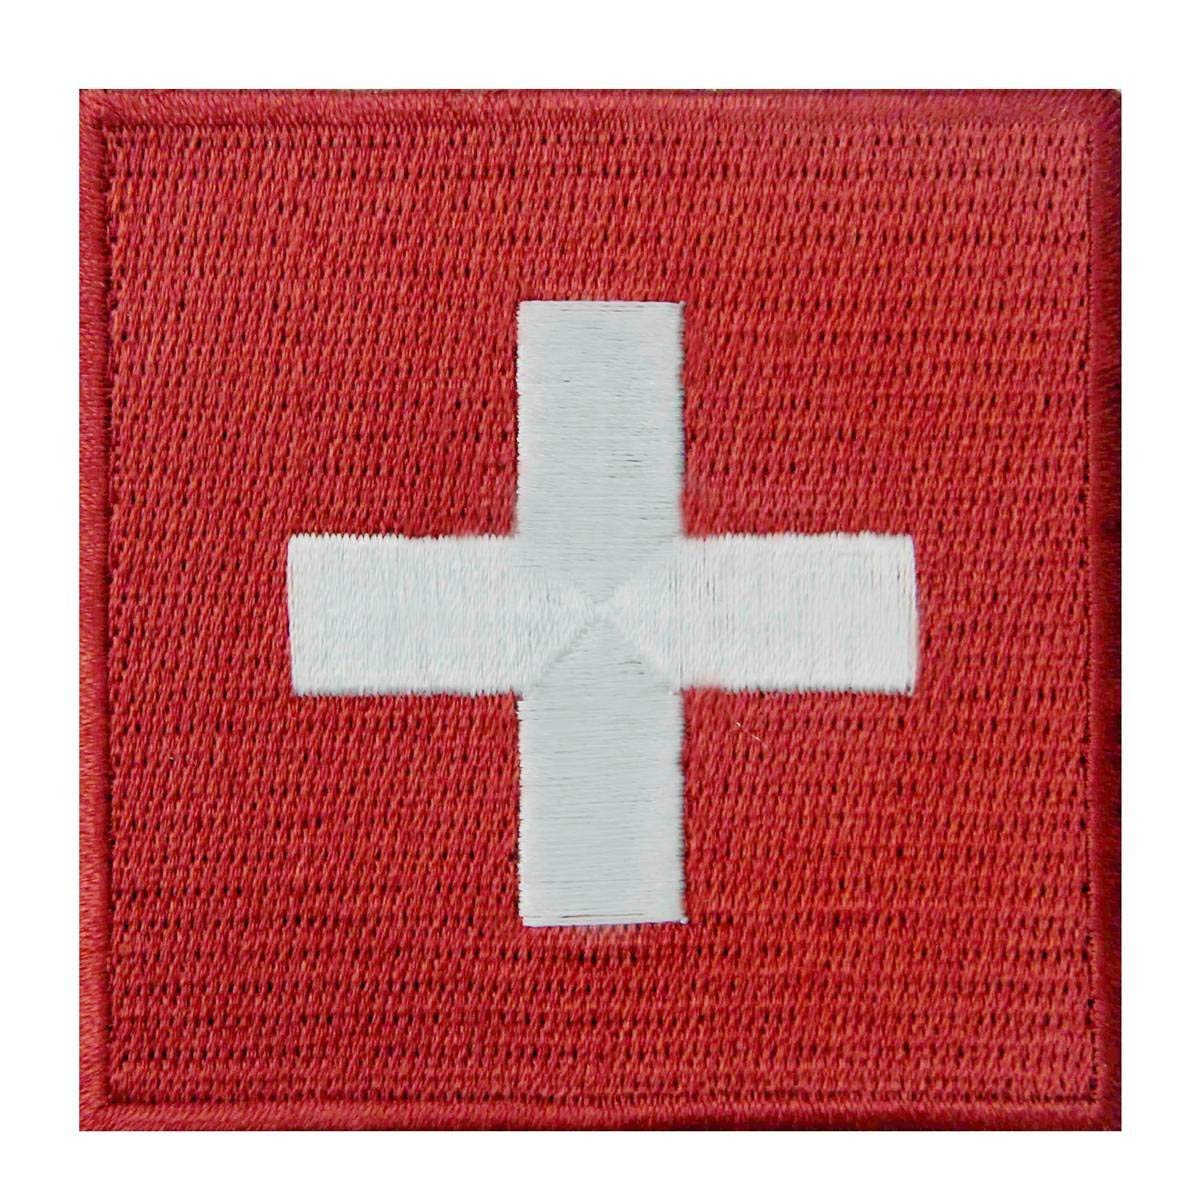 Swiss Flag Logo - Switzerland Flag Embroidered CH Patch Swiss Iron On Sew